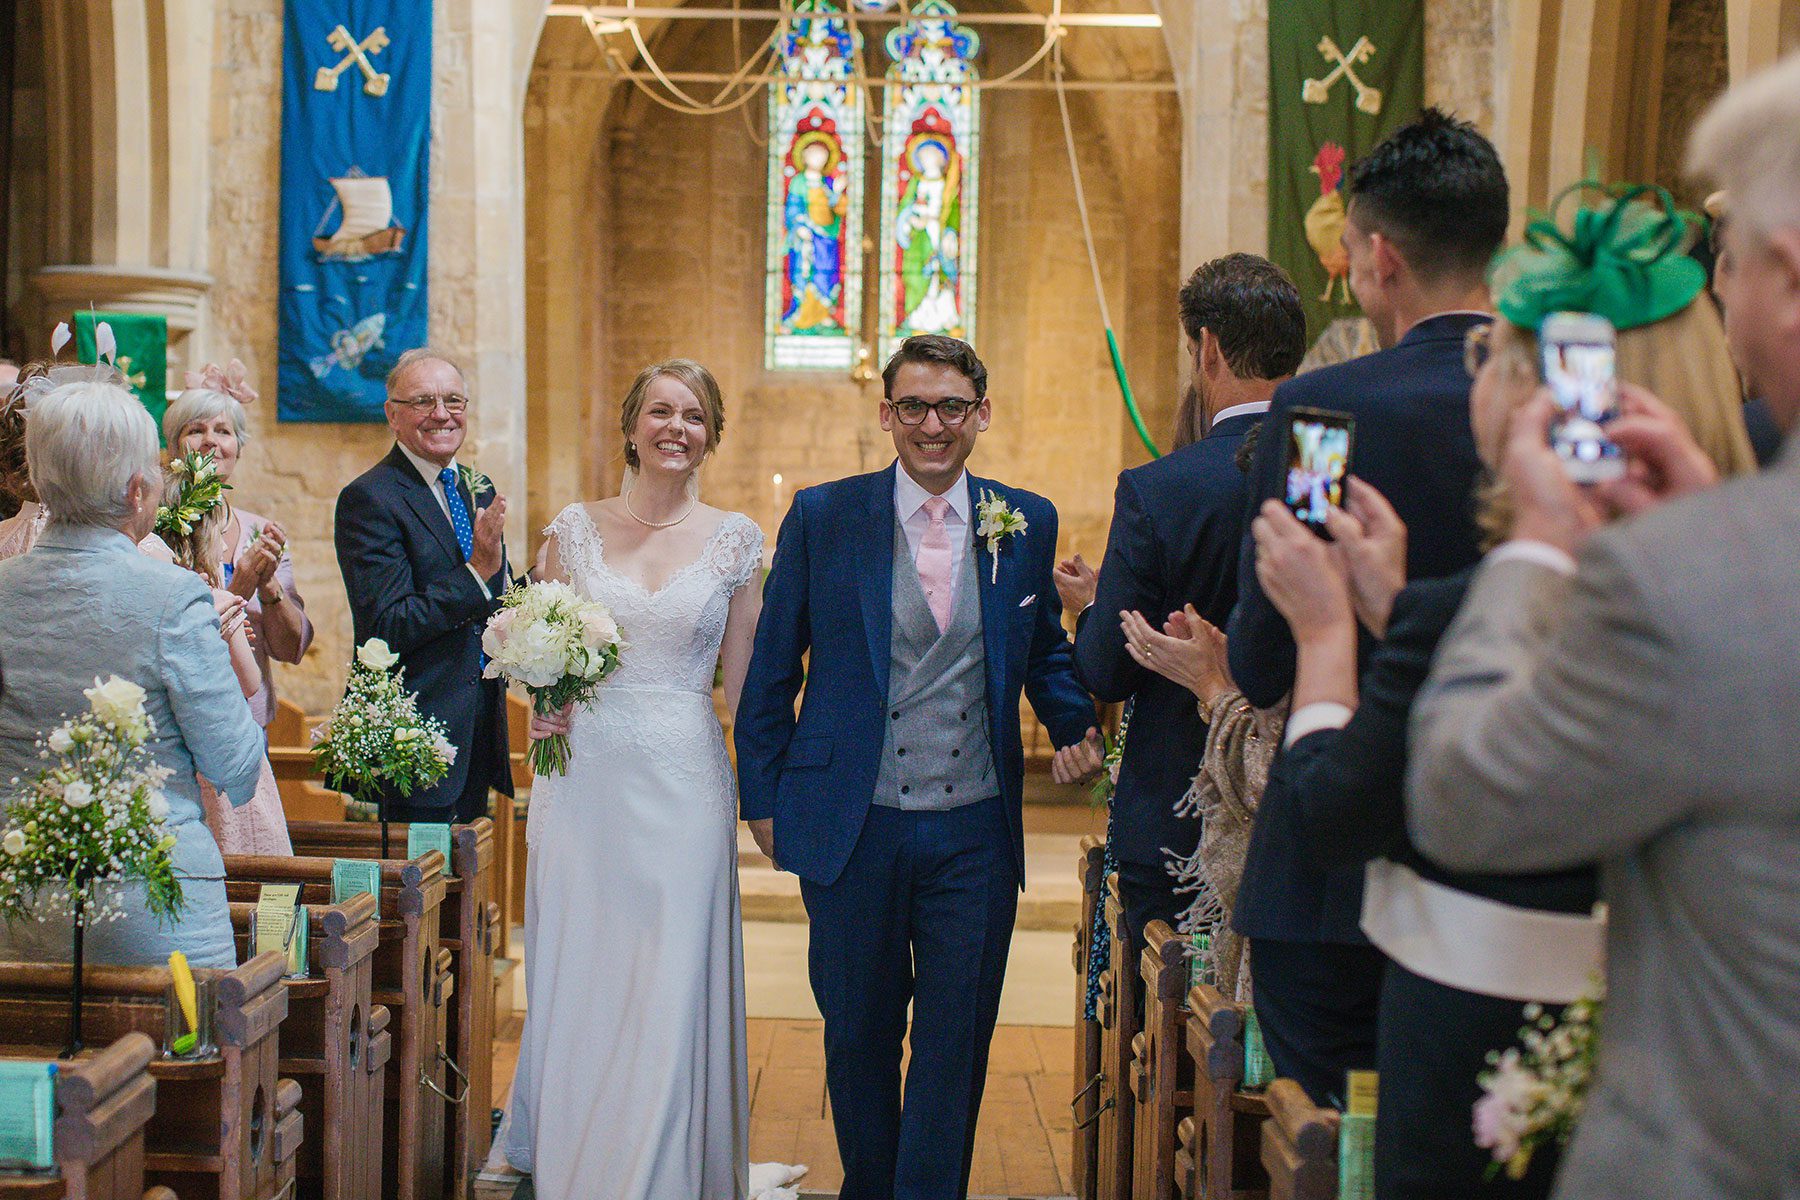 Happy couple - Reportage Wedding Photography in Cheltenham, Gloucestershire & the Cotswolds | Bullit Photography.